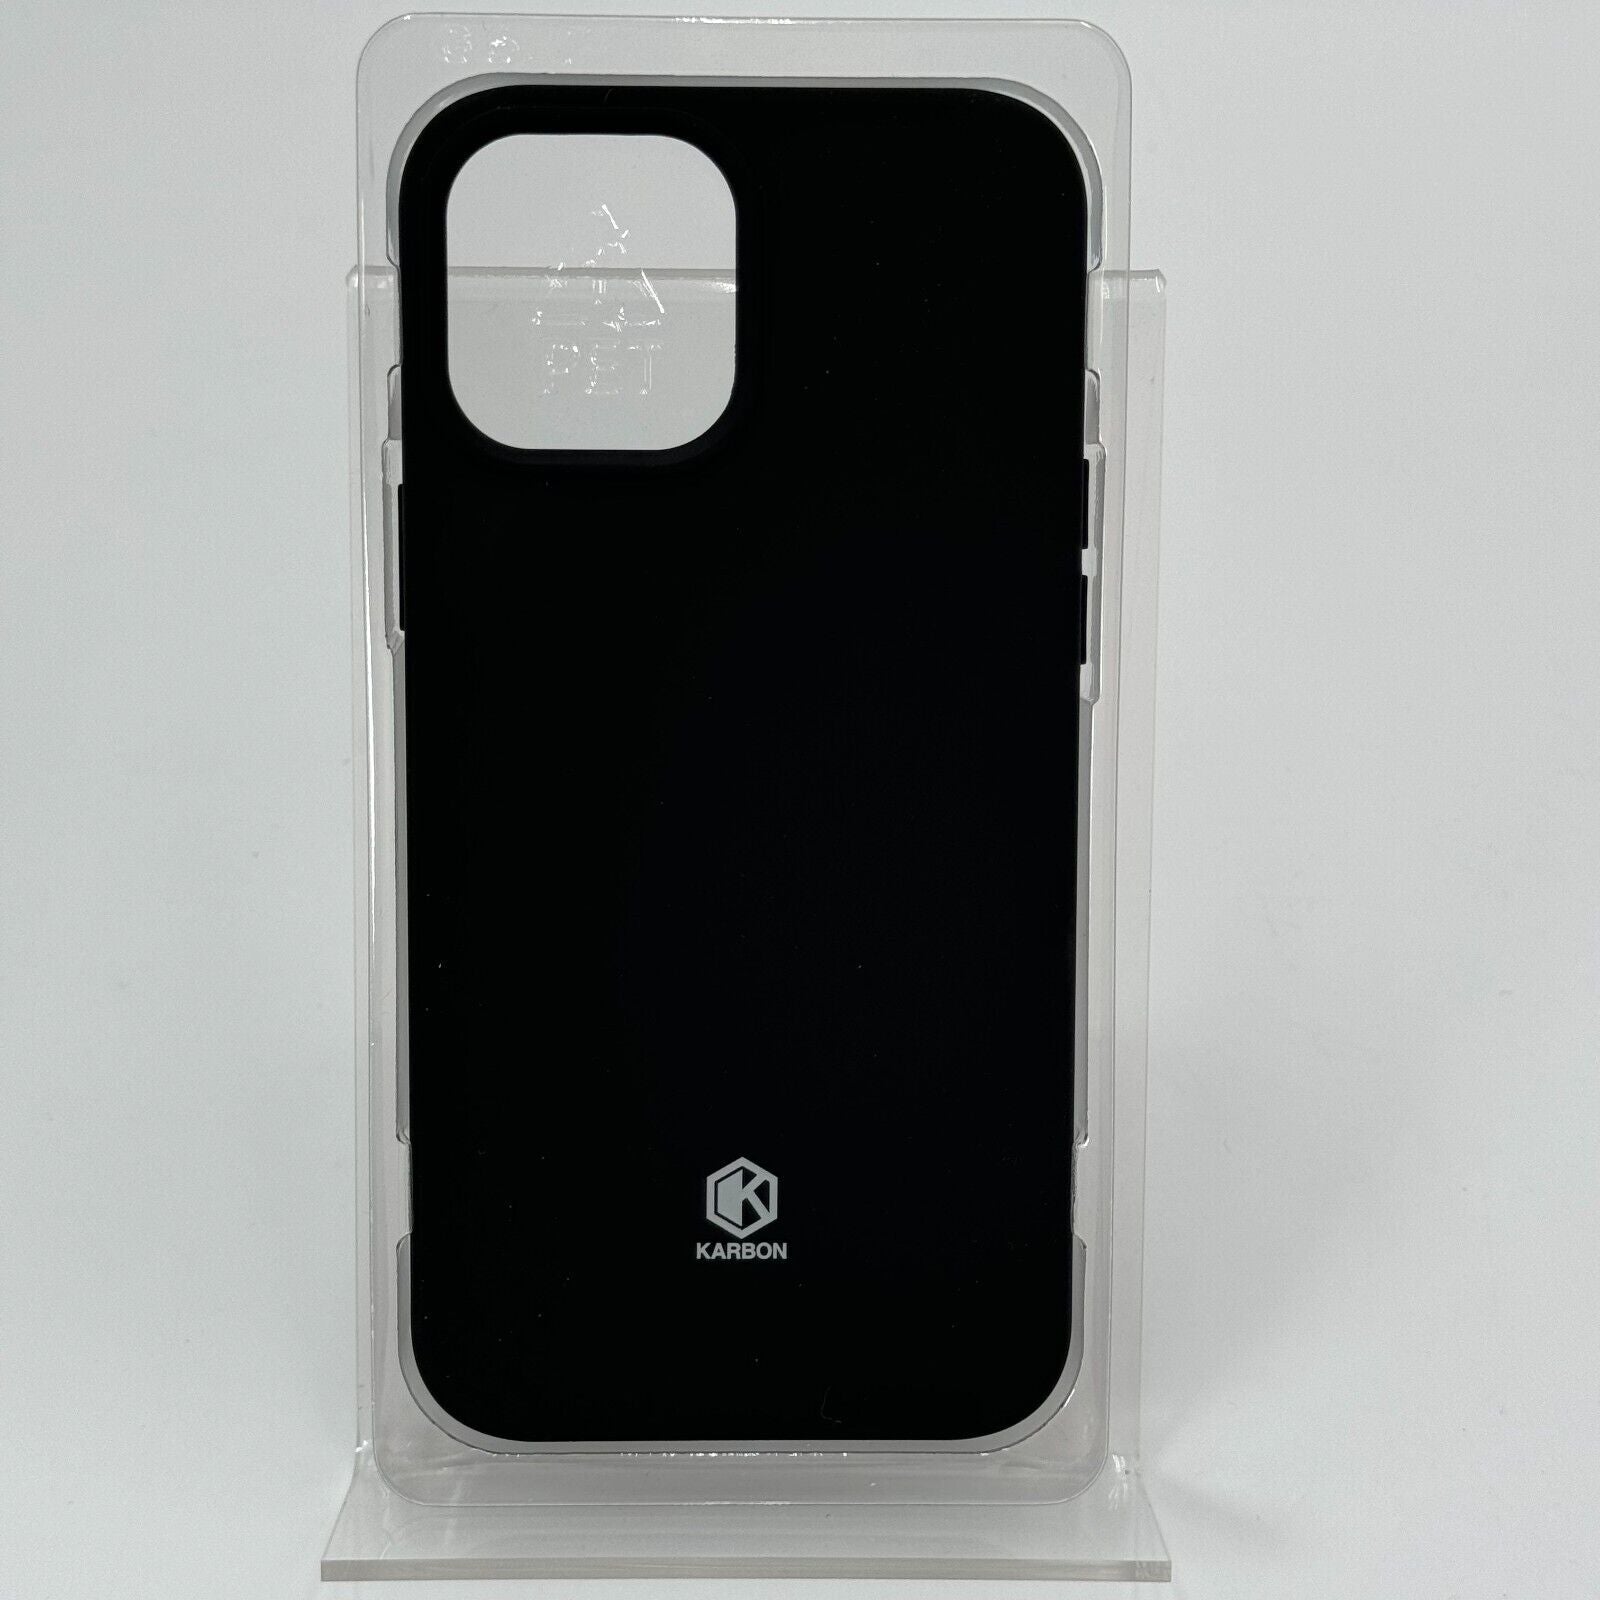 Evutec Karbon Black iPhone 12 Pro Max Drop Protection Hard Phone Case Smooth New